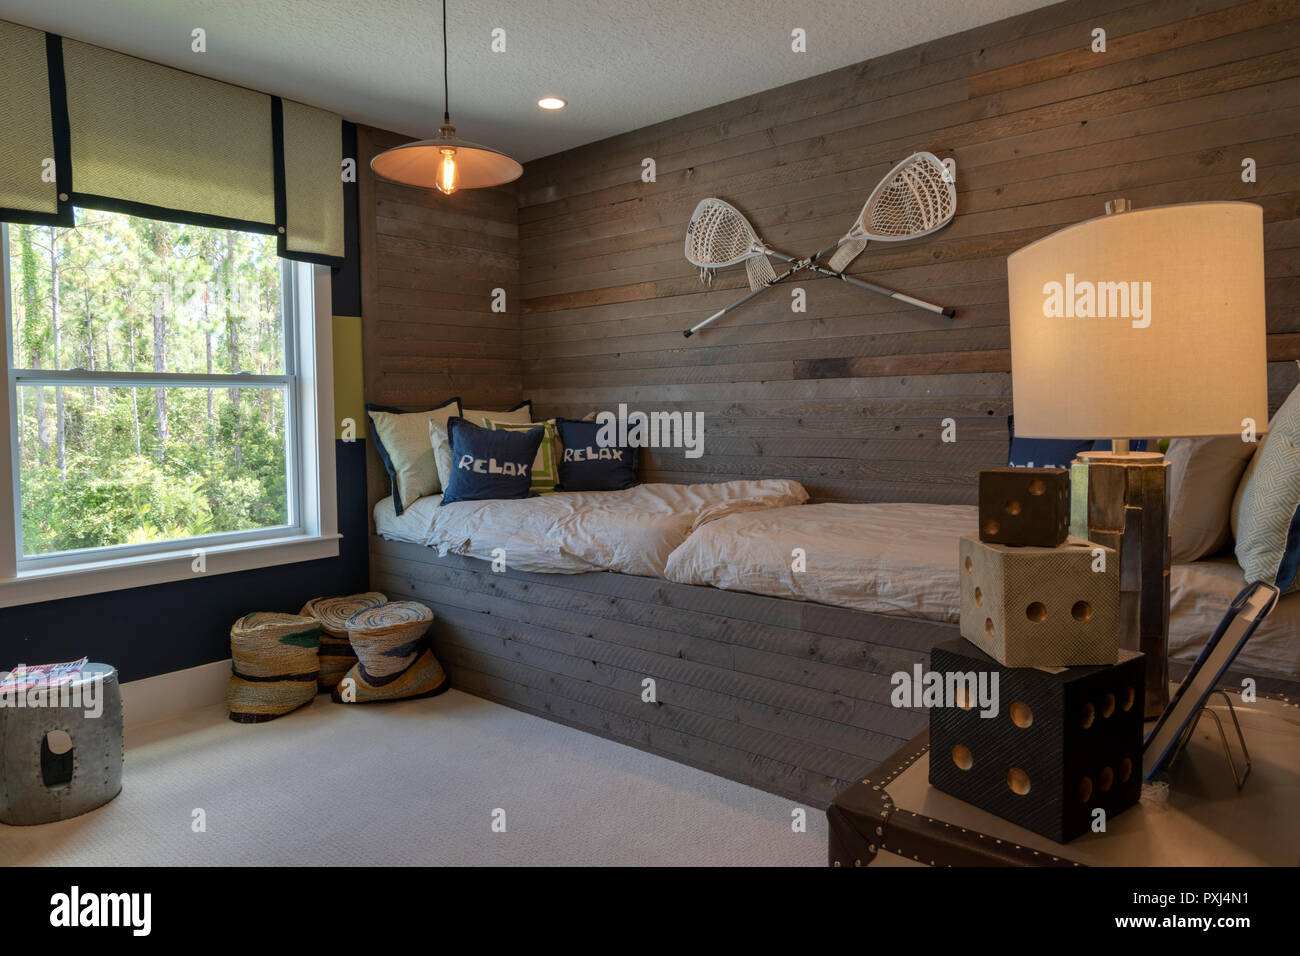 Boys bedroom with lacrosse theme with a bed and view outside Stock Photo